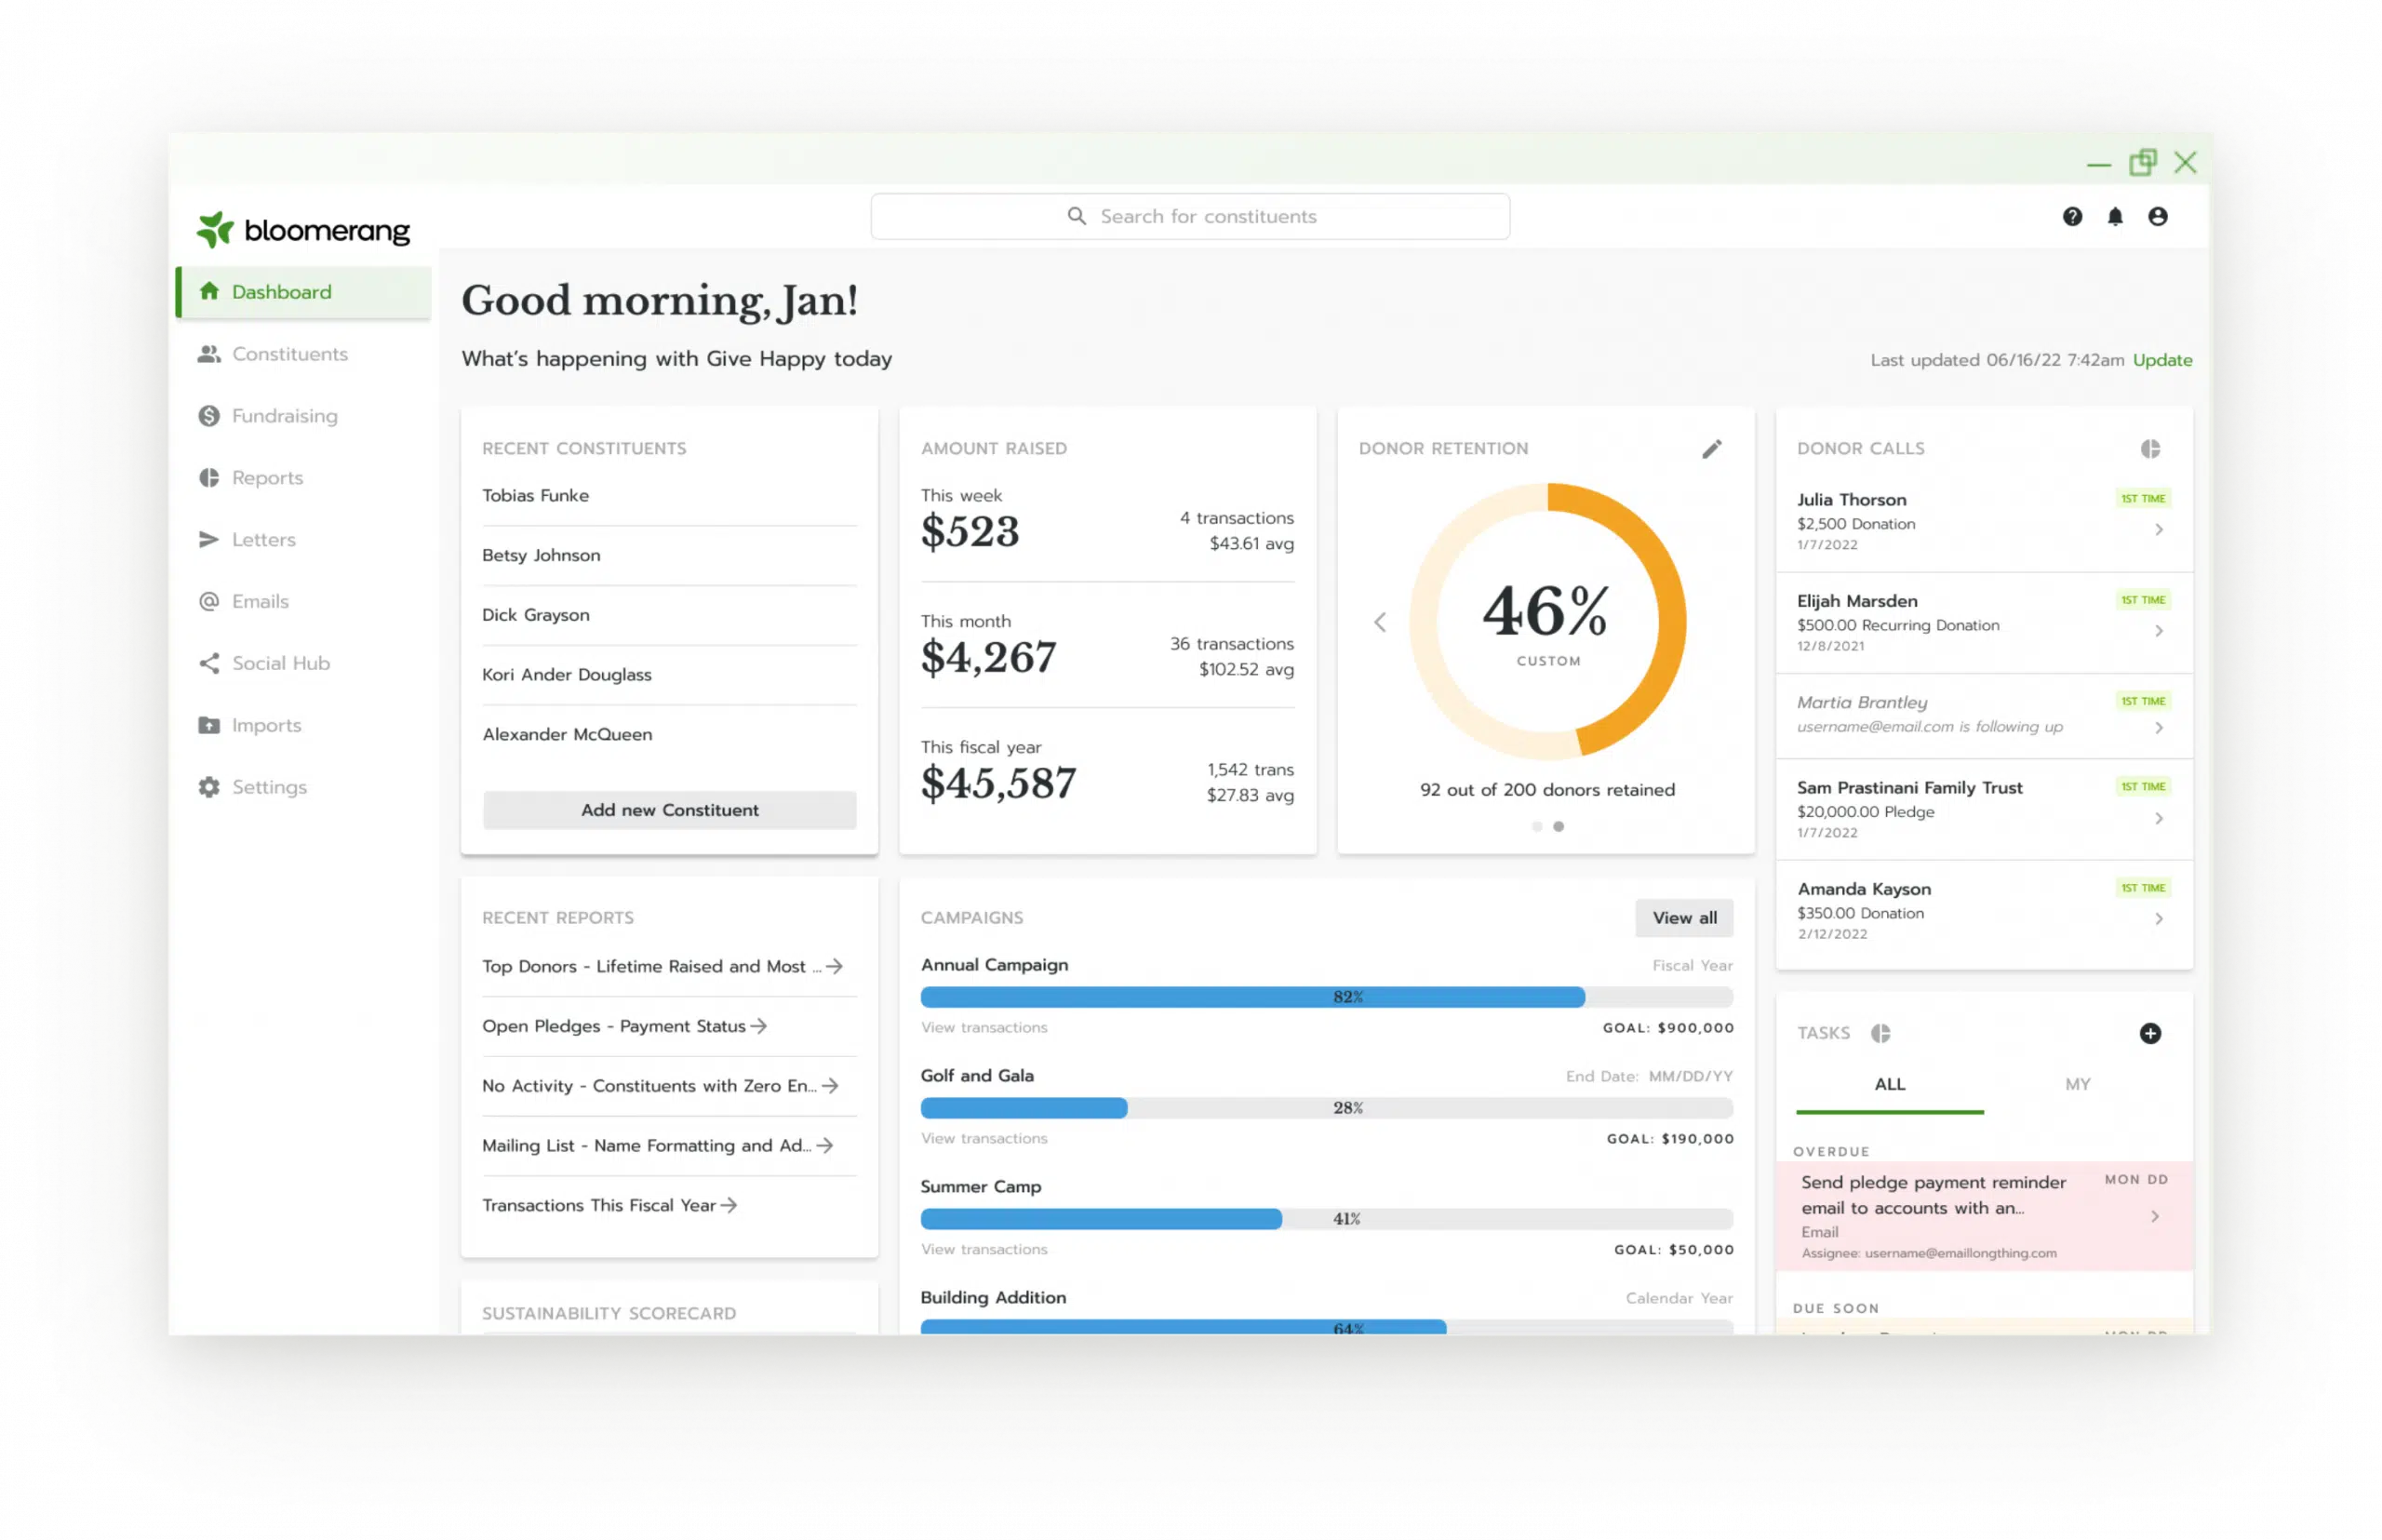 Bloomerang's desktop dashboard user interface is shown, highlighting an example nonprofit organization's recently joined constituents, active campaigns, tasks, fundraising efforts, a donor retention metric and recent customizable reports that be quickly shared with others..